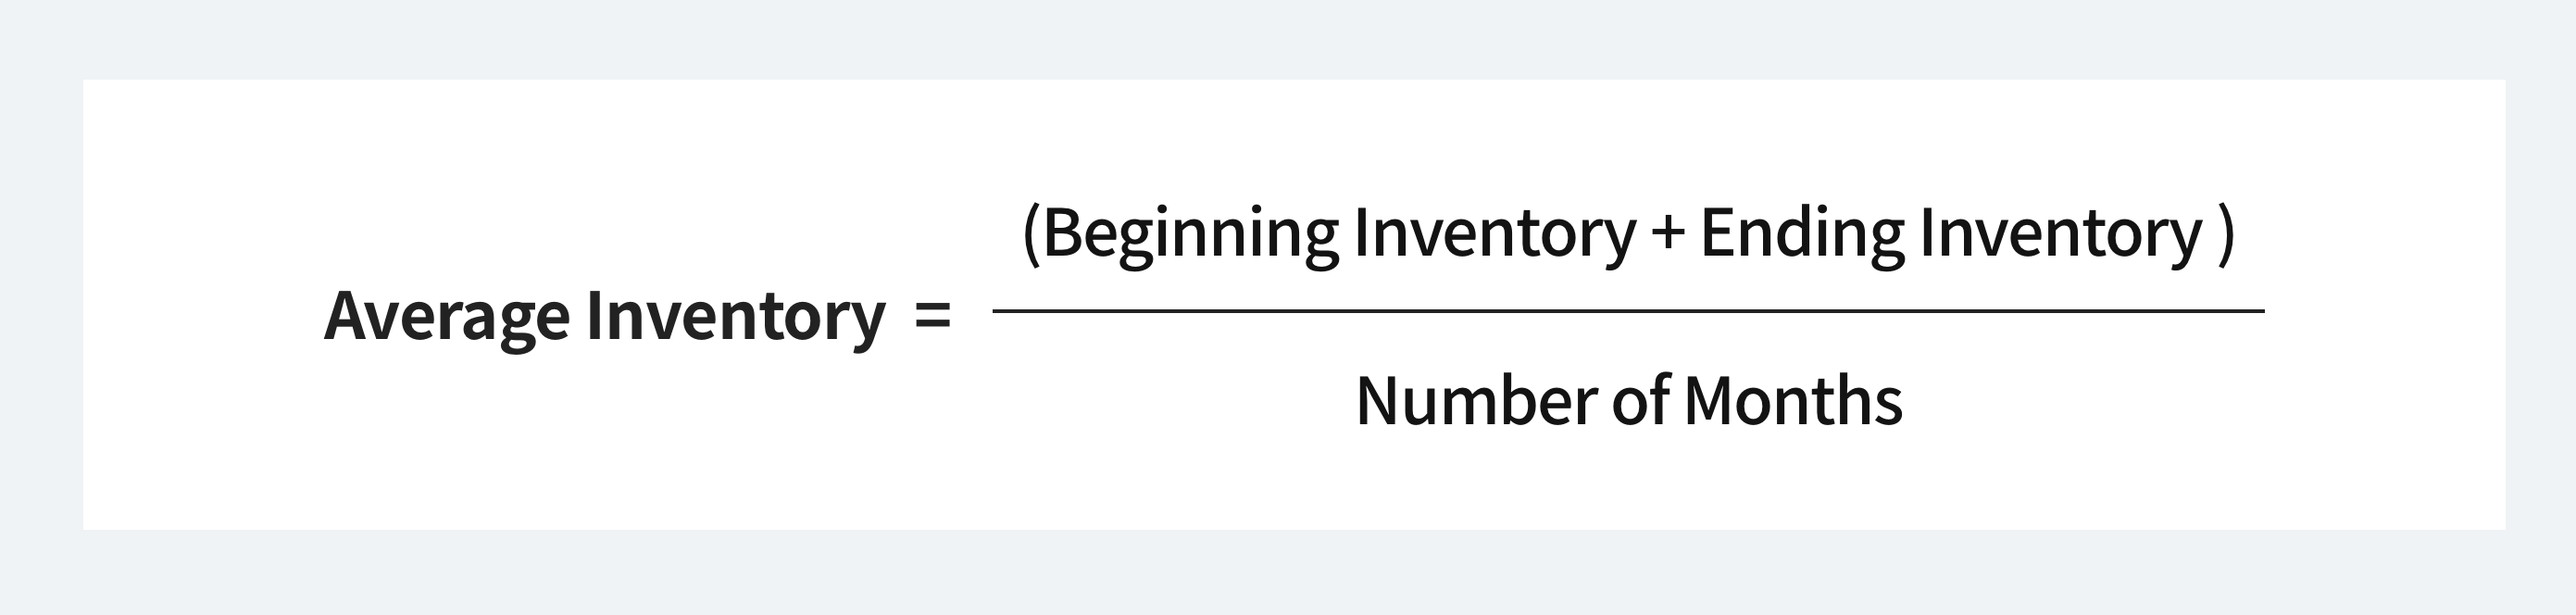 Average Inventory = (Beginning Inventory + Ending Inventory) / Number of Months